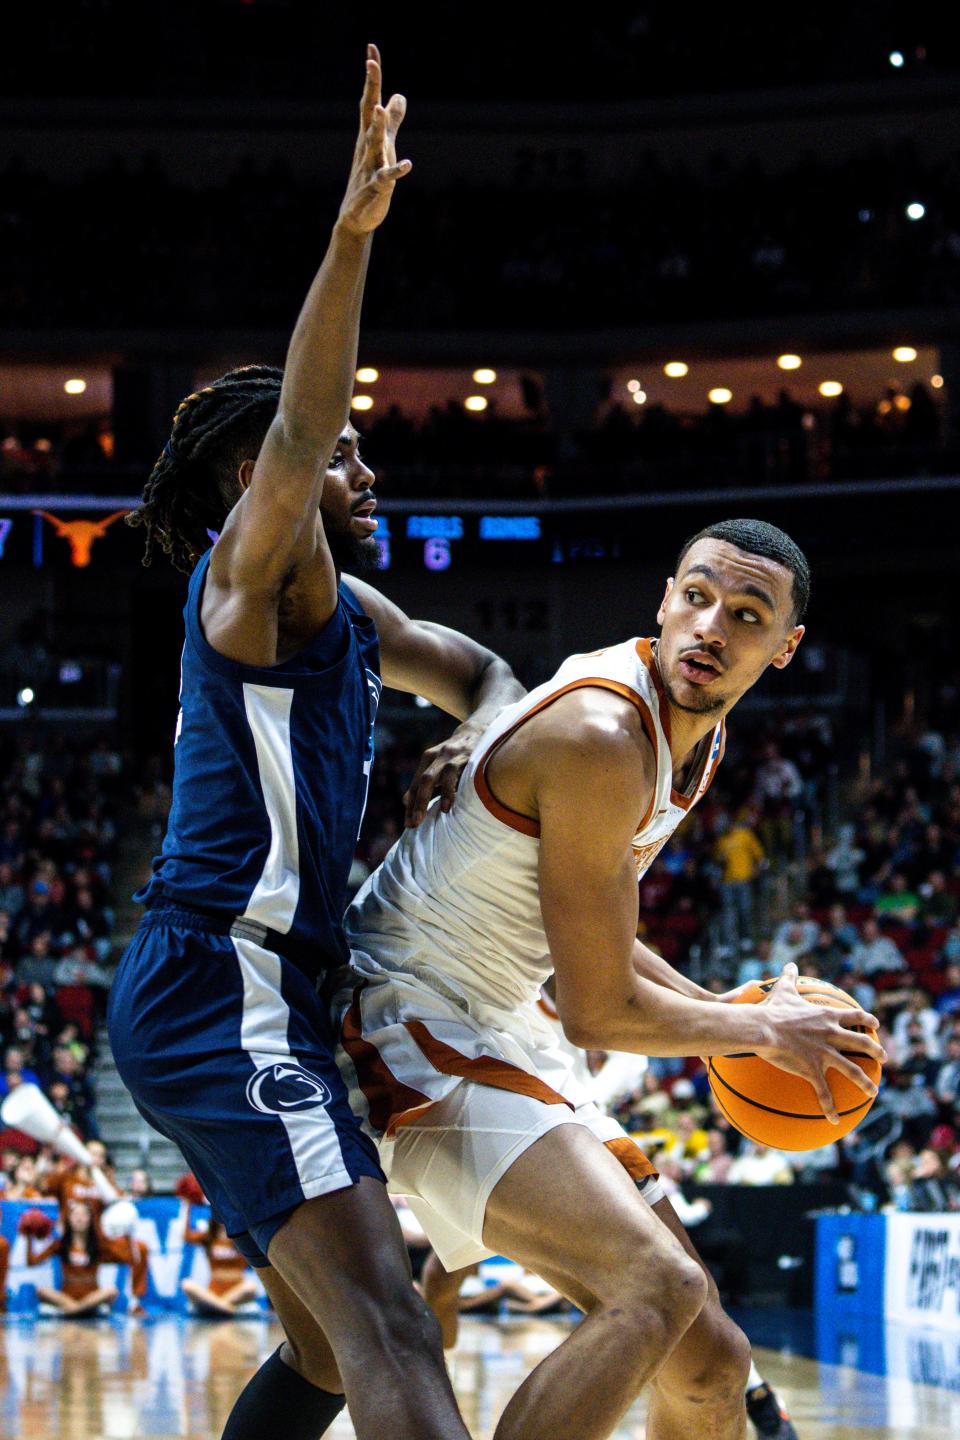 Penn State guard Evan Mahaffey guards Texas forward Dylan Disu during an NCAA menÕs basketball tournament second round basketball game on Saturday, March 18, 2023, at Wells Fargo Arena, in Des Moines, Iowa.